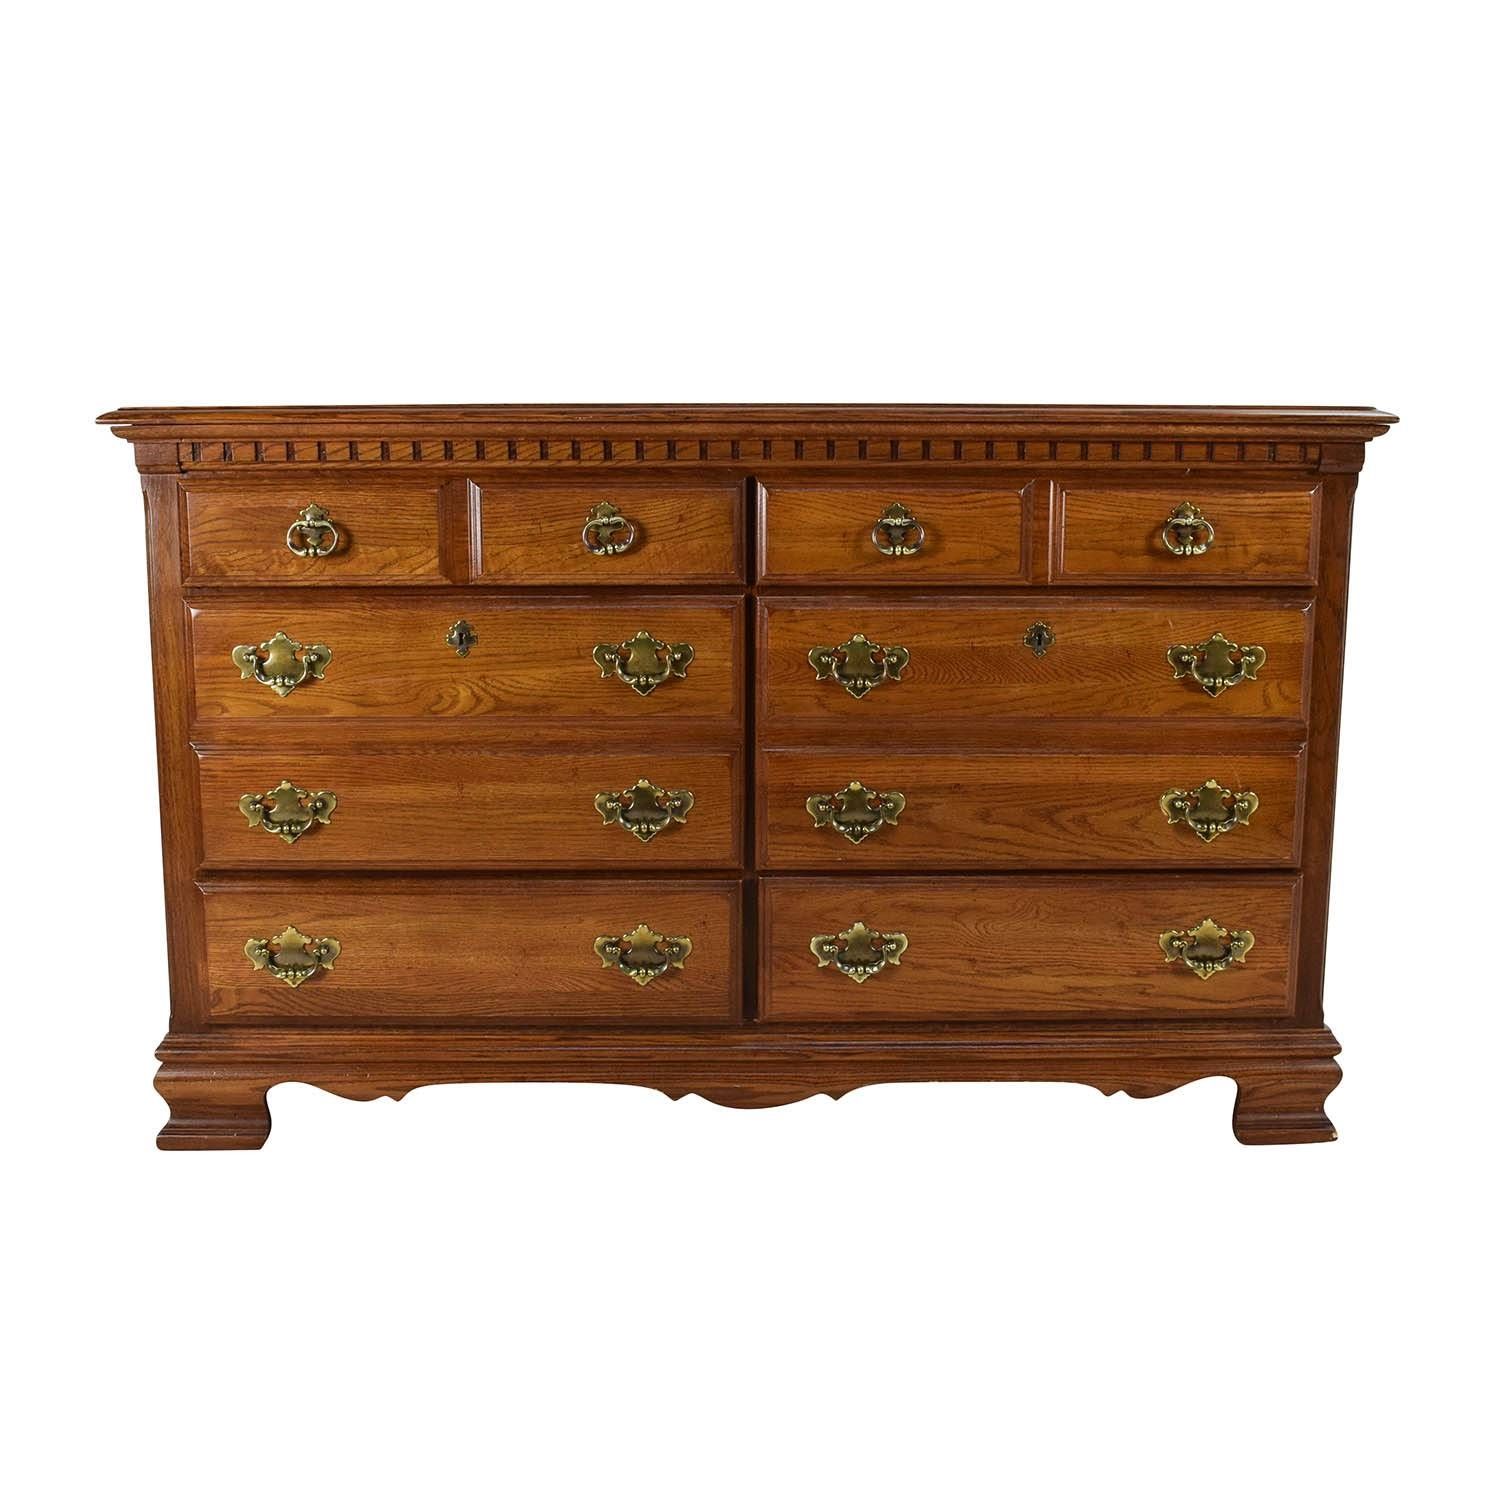 64% Off – Kincaid Furniture Kincaid Furniture Solid Wood Dresser Throughout 2018 Second Hand Dressers And Sideboards (Photo 8 of 15)